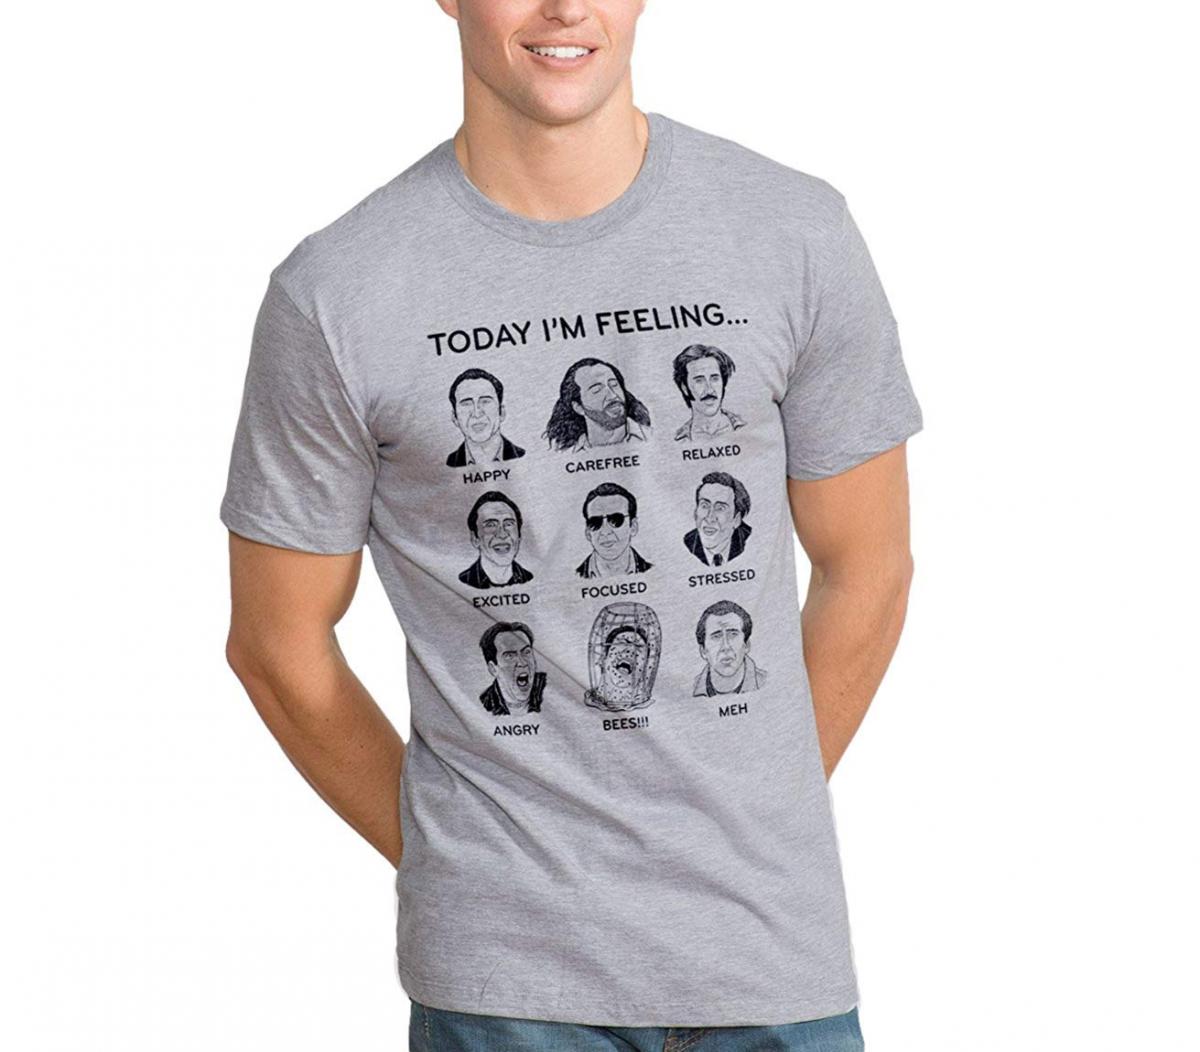 Nicolas Cage Face emotions t-shirt - Funny white elephant gift